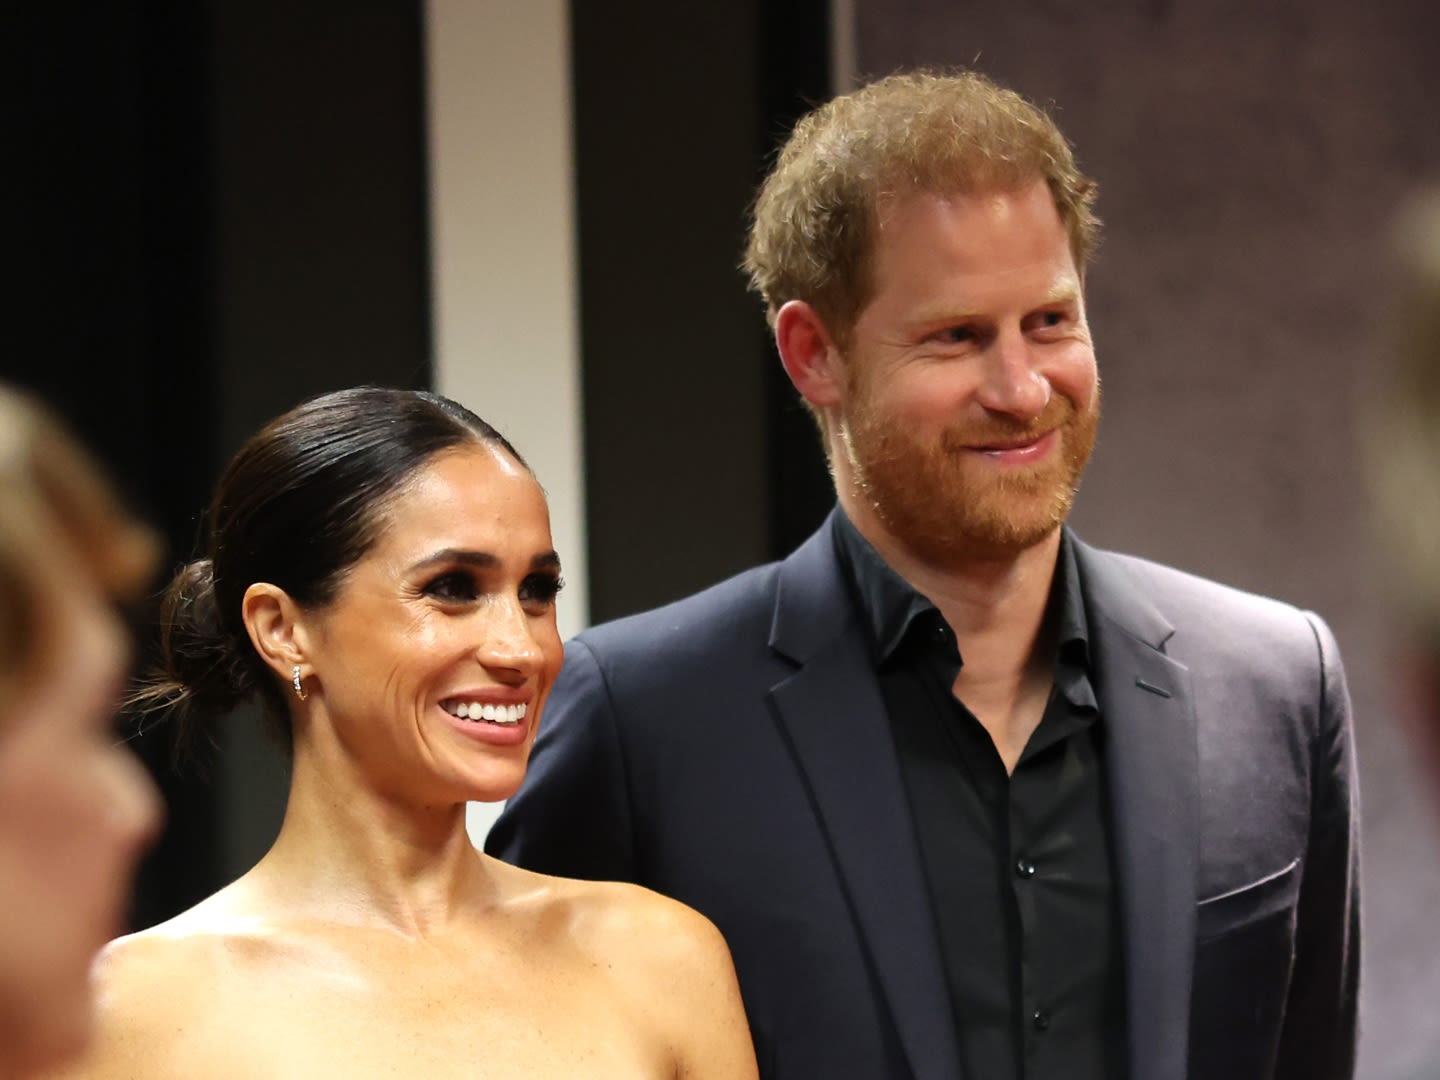 Prince Harry & Meghan Markle Might Be Declining an Australia Visit for This Royal Reason